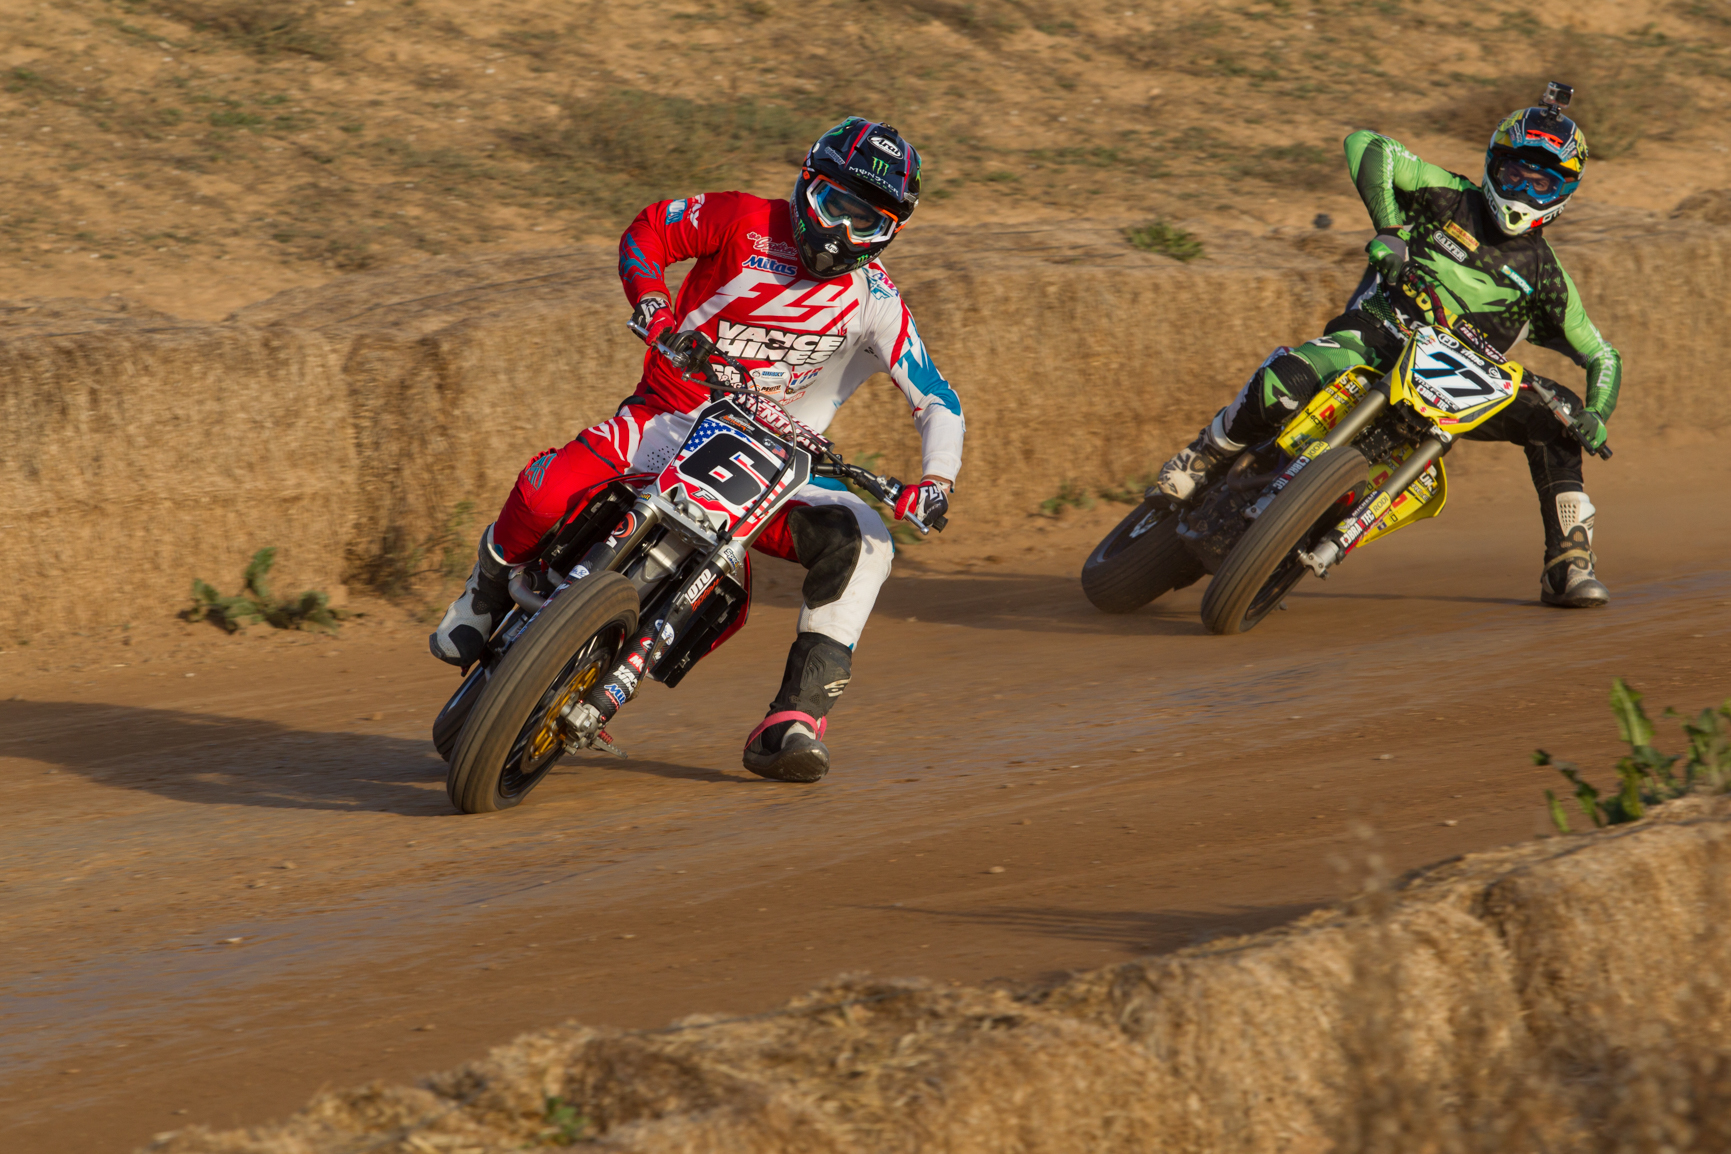 Baker (6) has some fun in the dirt with RFME Spanish Flat Track Champion Ferran Cardus (77). 